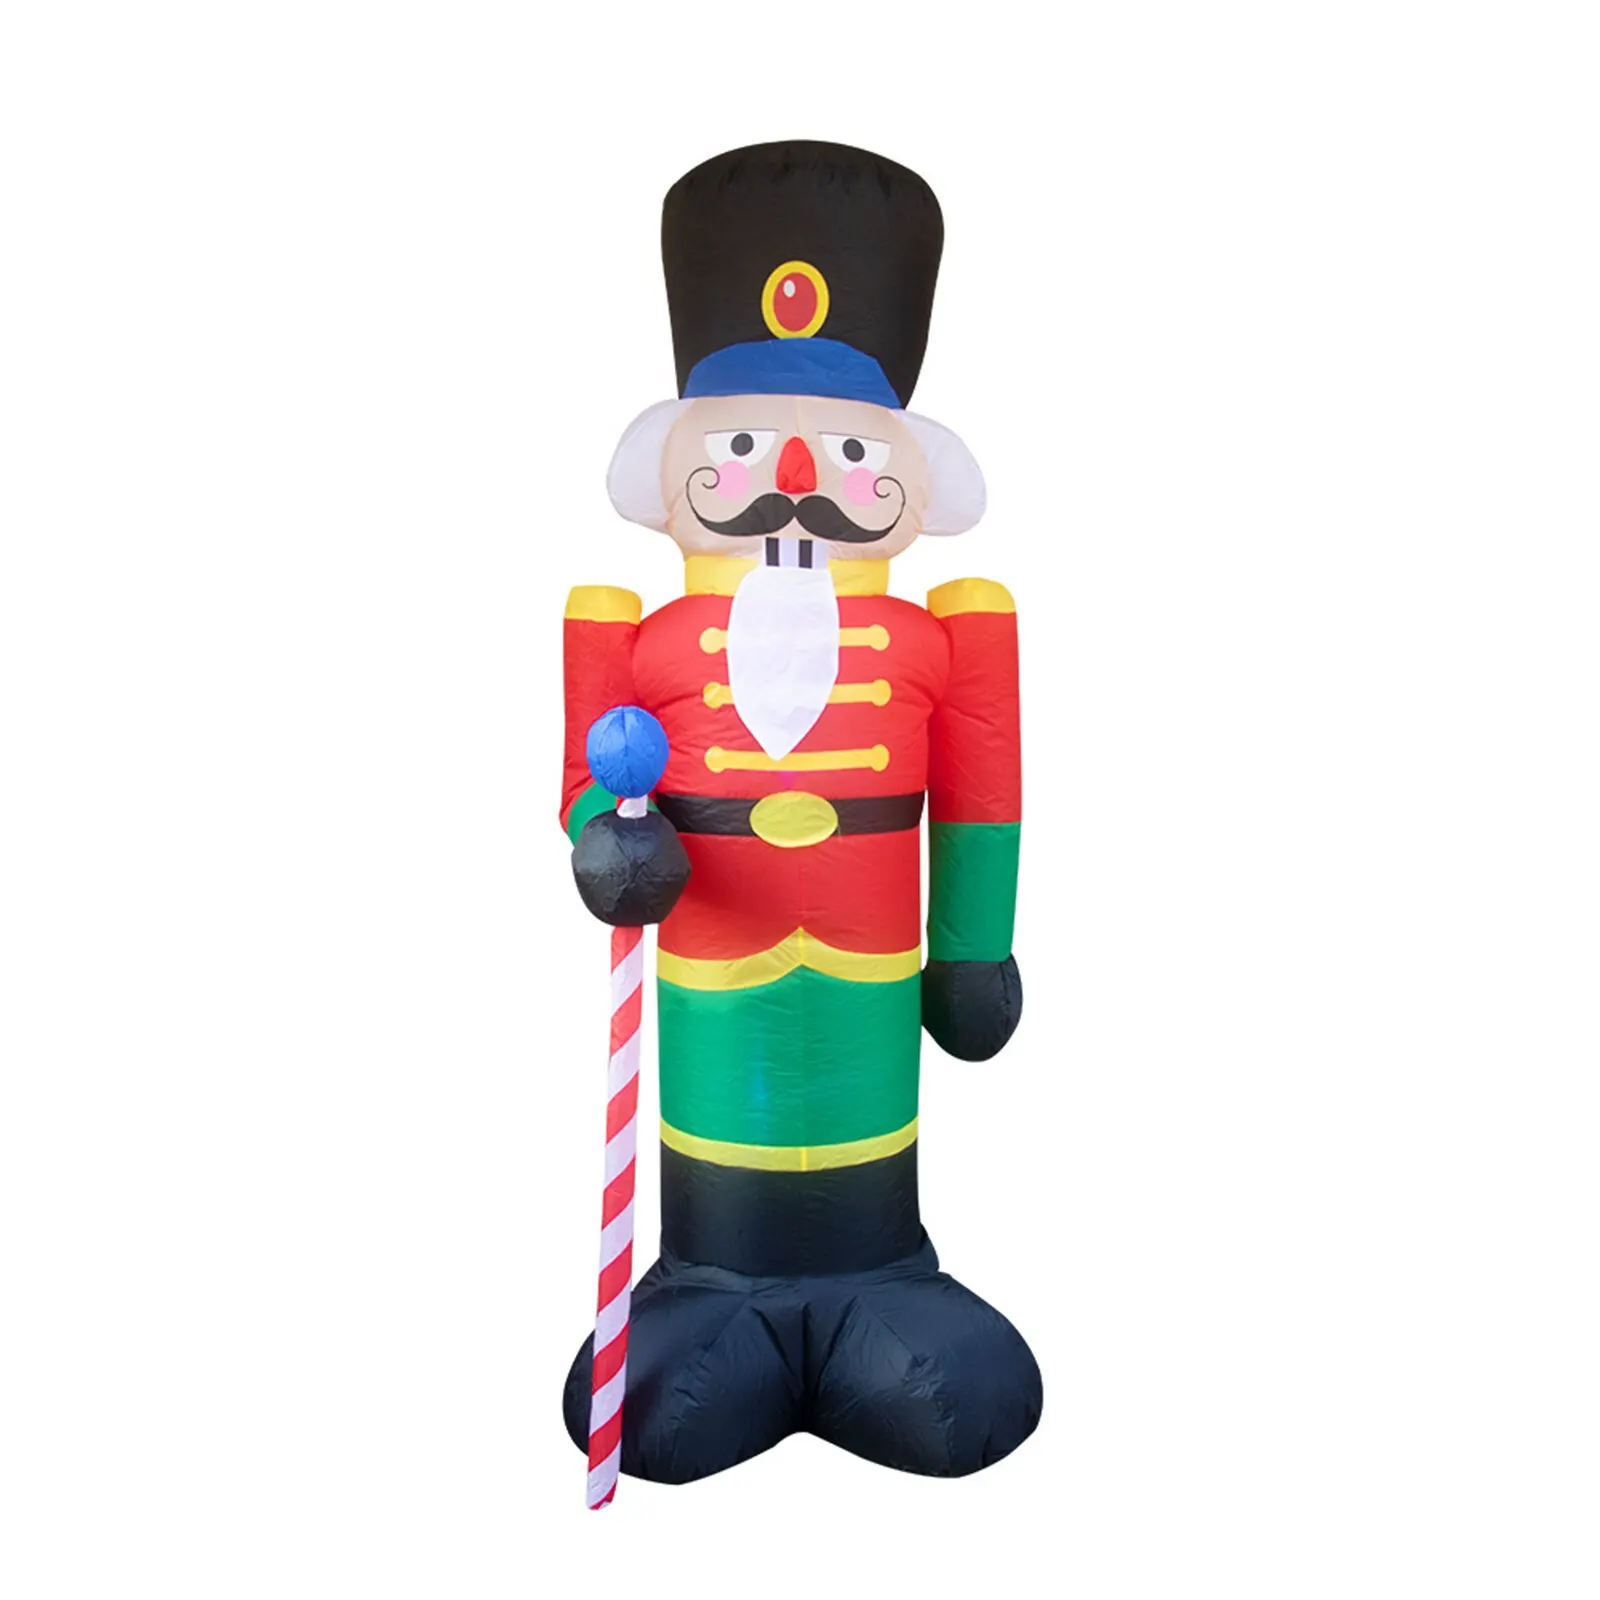 Christmas Inflatable Ornaments Soldier Art Decor Supplies Inflatable Doll Giant For Yard Garden Decoration 2.4M Nutcracker